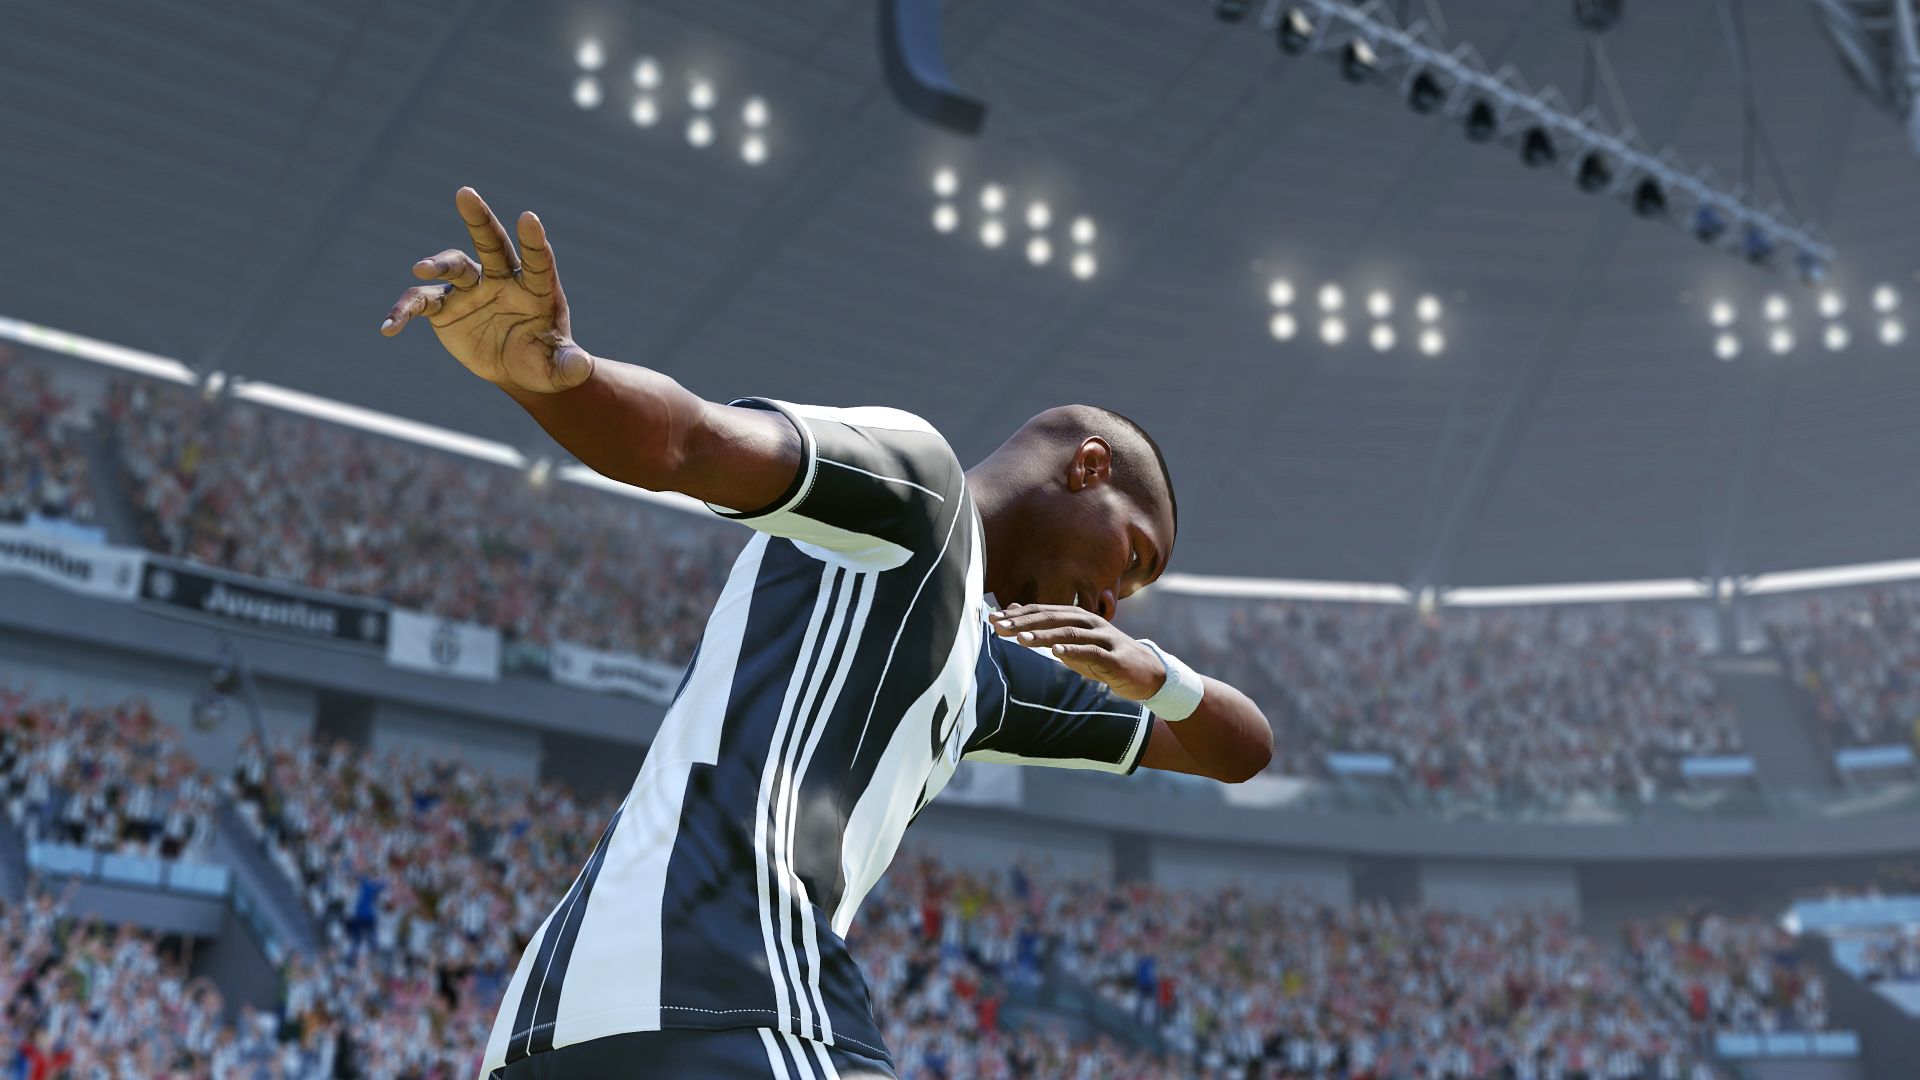 Football computer game depicting a player celebrating by striking a pose while wearing a black and white uniform.